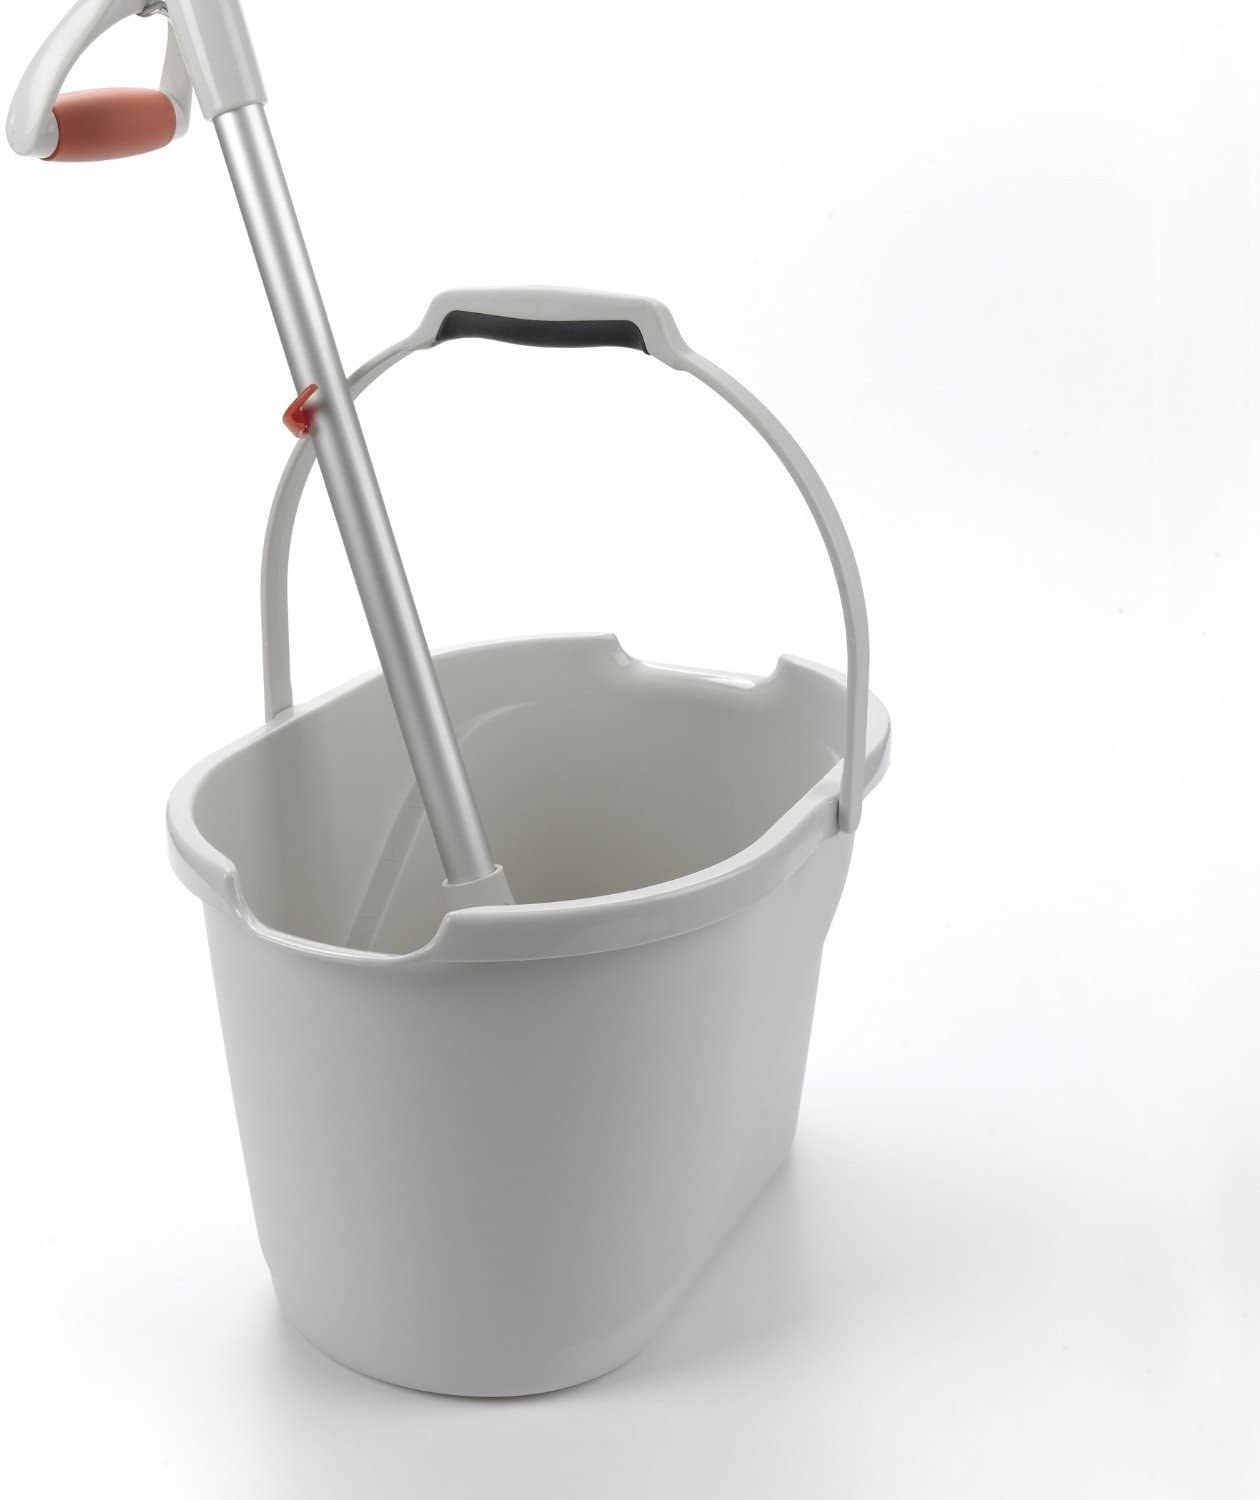 A white plastic bucker with handled extended while holding up a mop